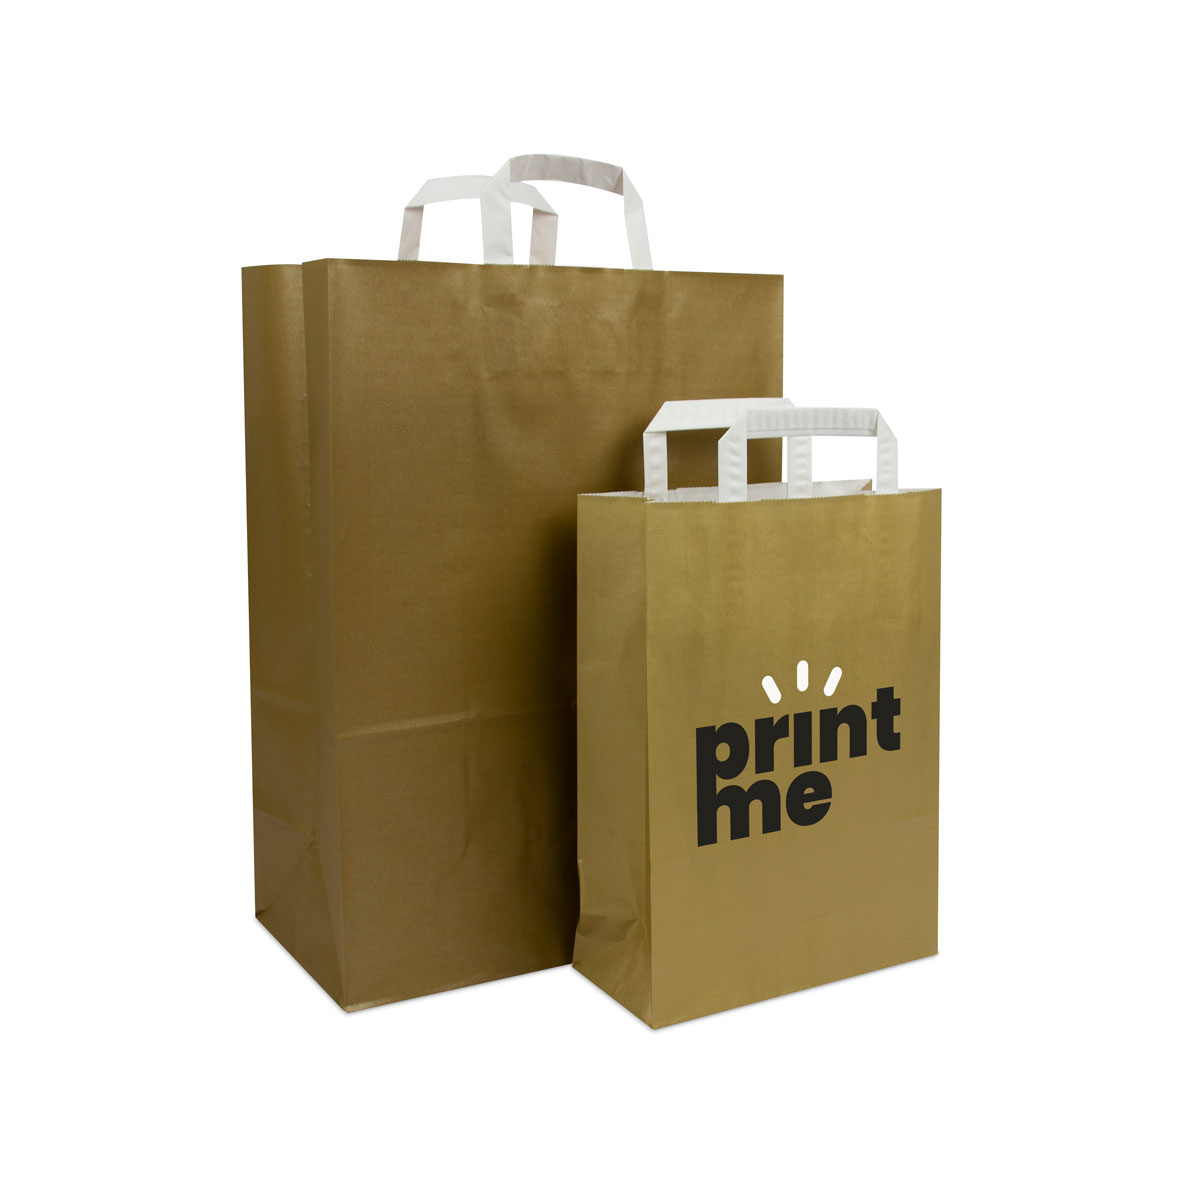 Budget paper bags with flat paper handles